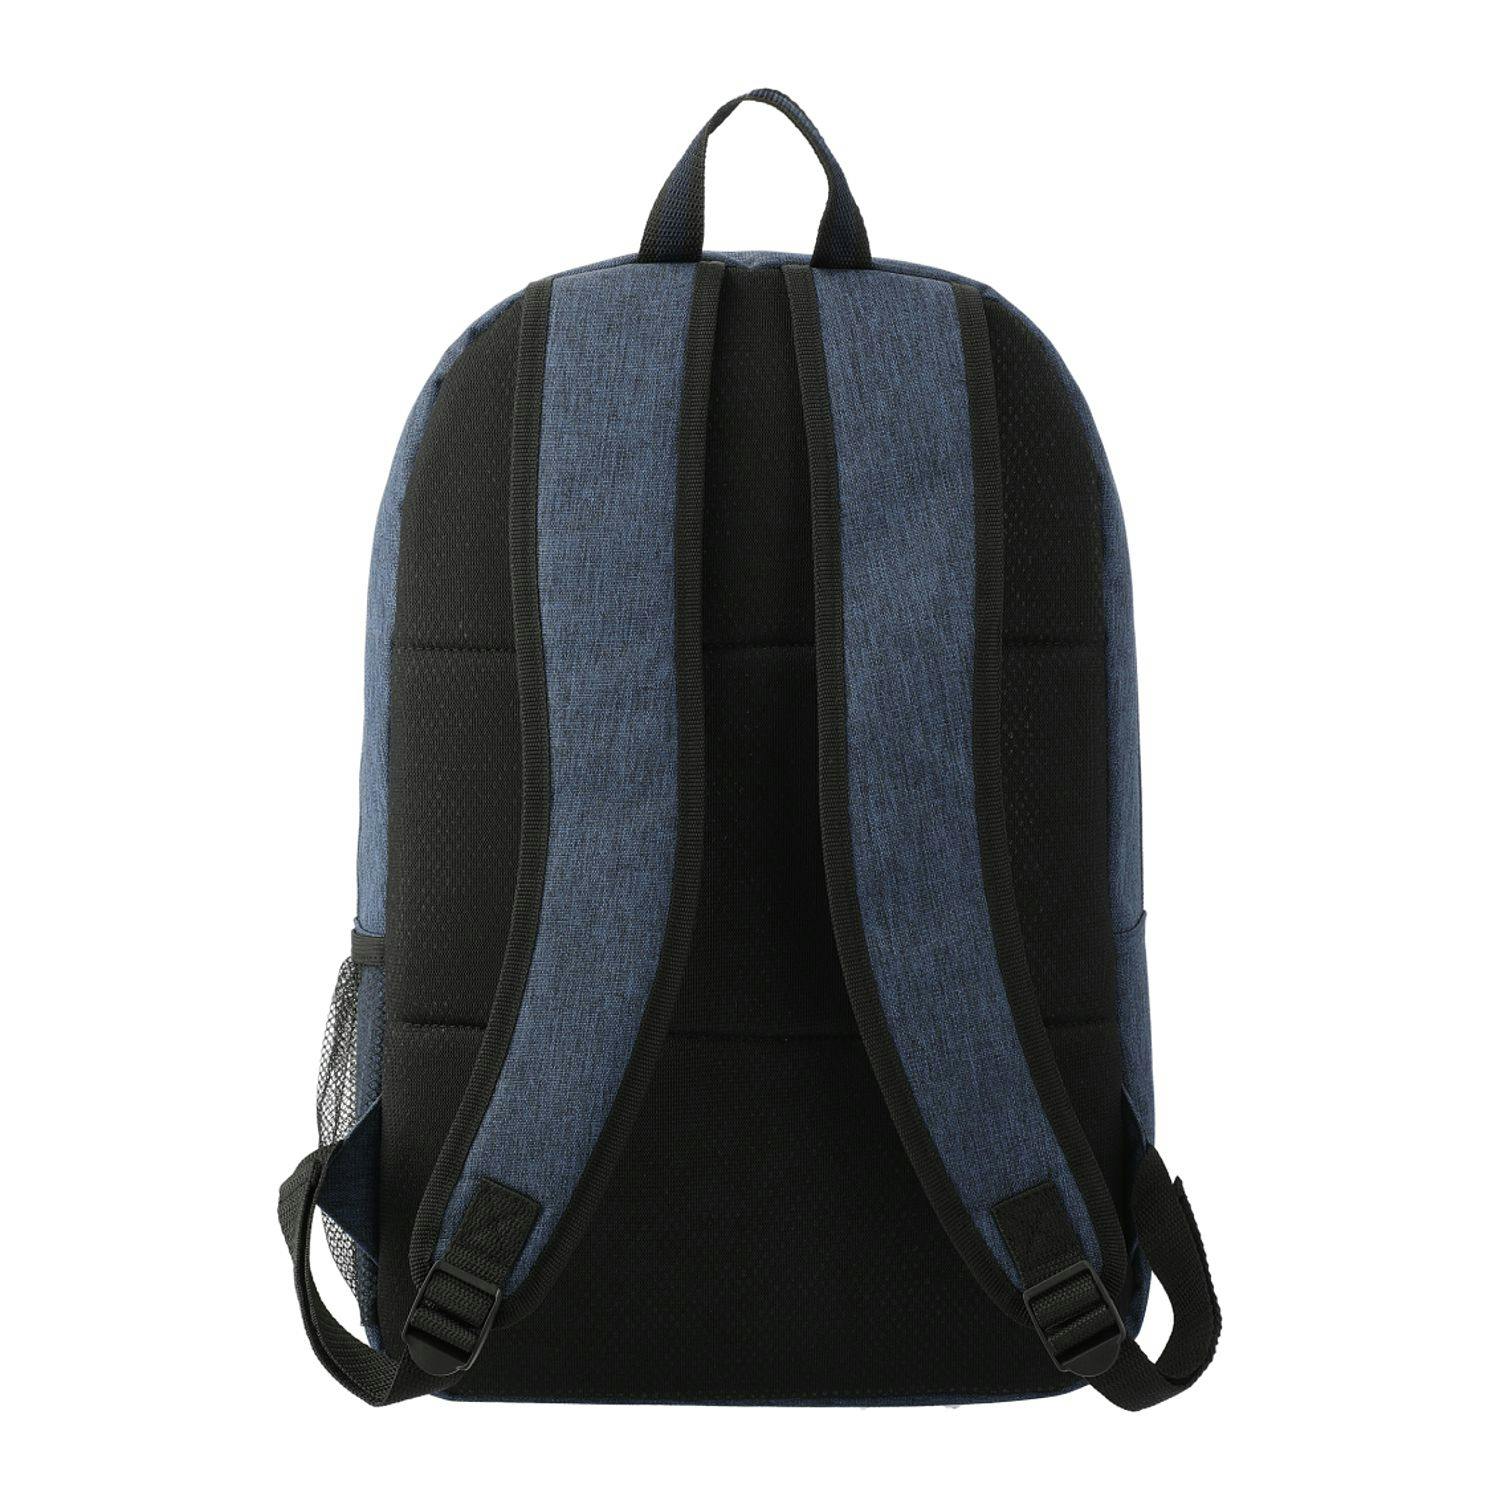 Graphite Deluxe 15" Computer Backpack - additional Image 3